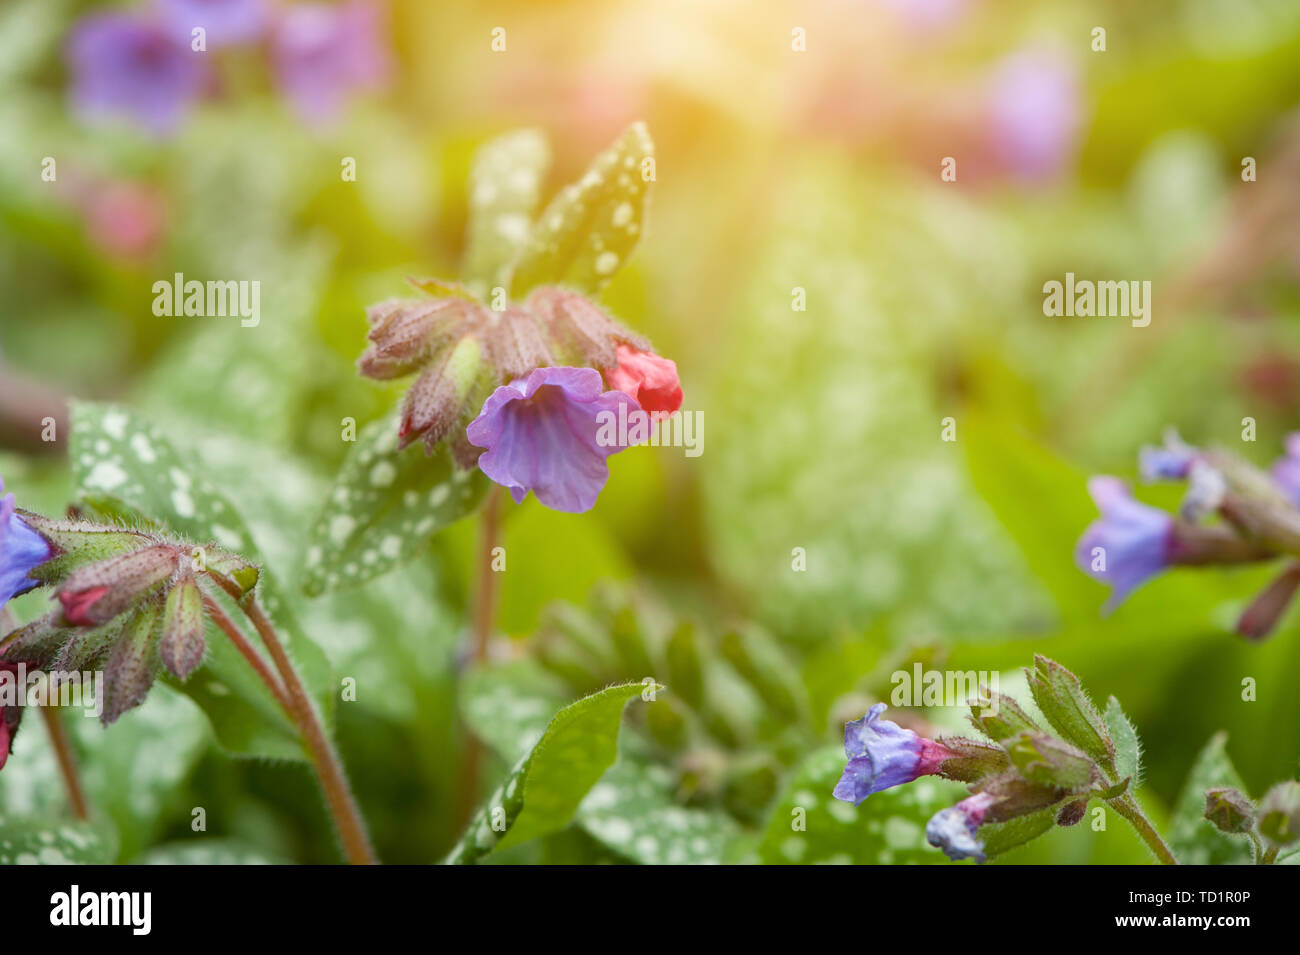 Lungwort Flowers (Pulmonaria Officinalis). Violet Lungwort flowers (also known as Our Lady's Milk Drops or Common Lungwort) close-up Stock Photo